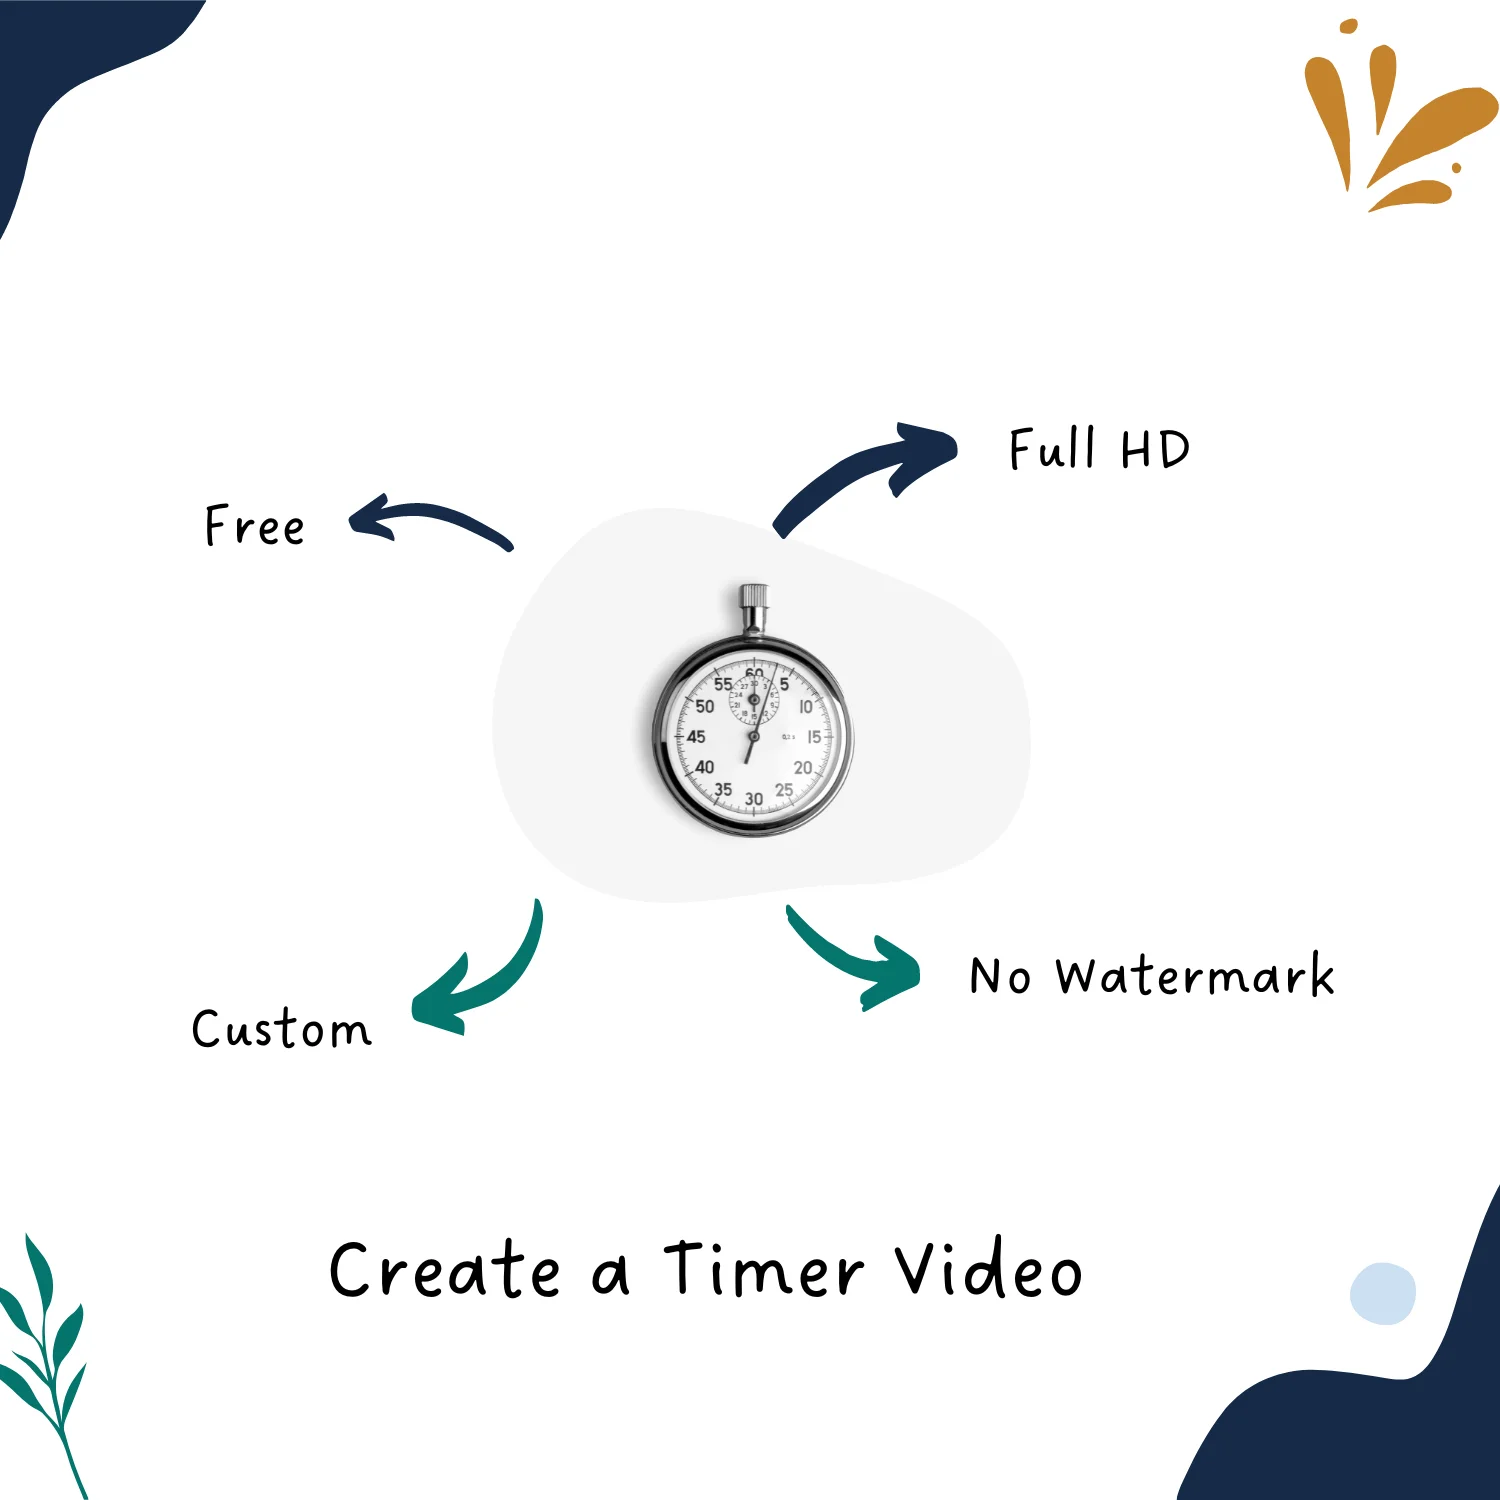 How to Create a Free HD Countdown Timer Video (No Watermark)